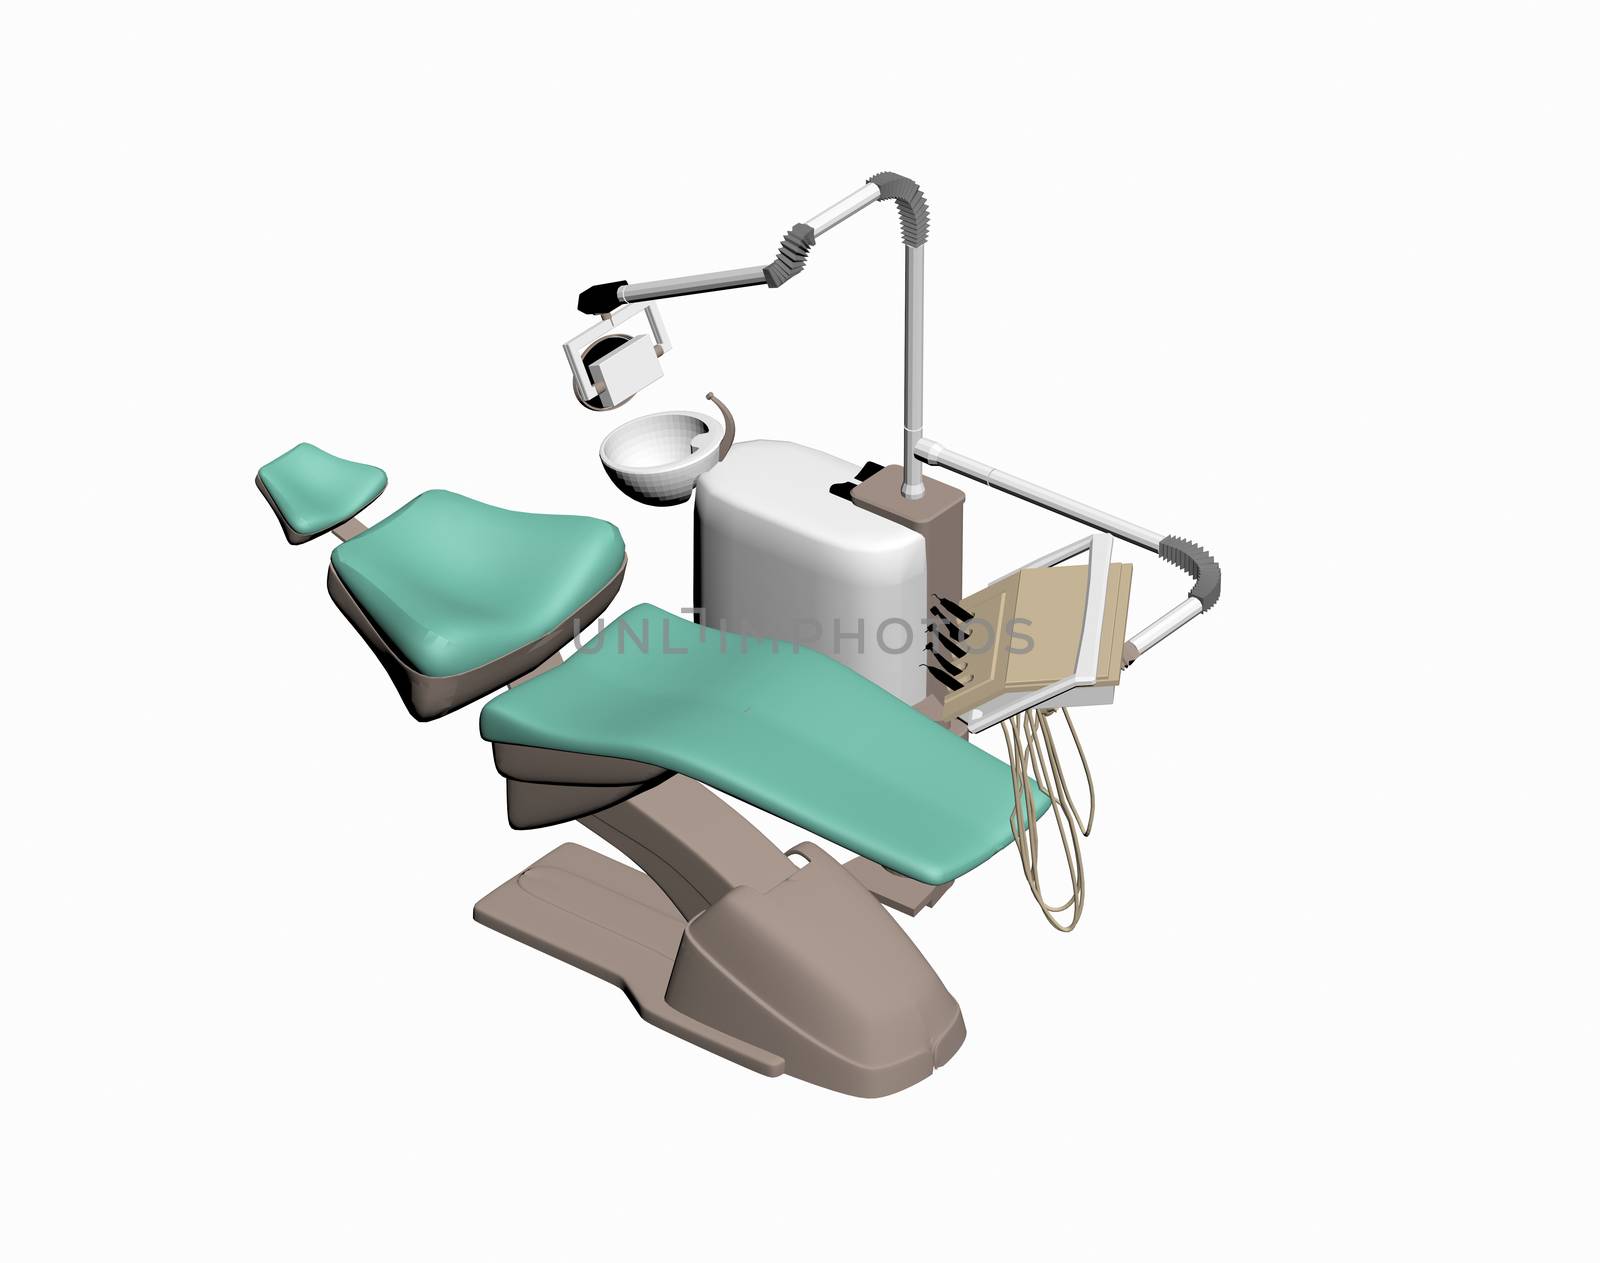 green dentist chair with table and instruments by Dr-Lange